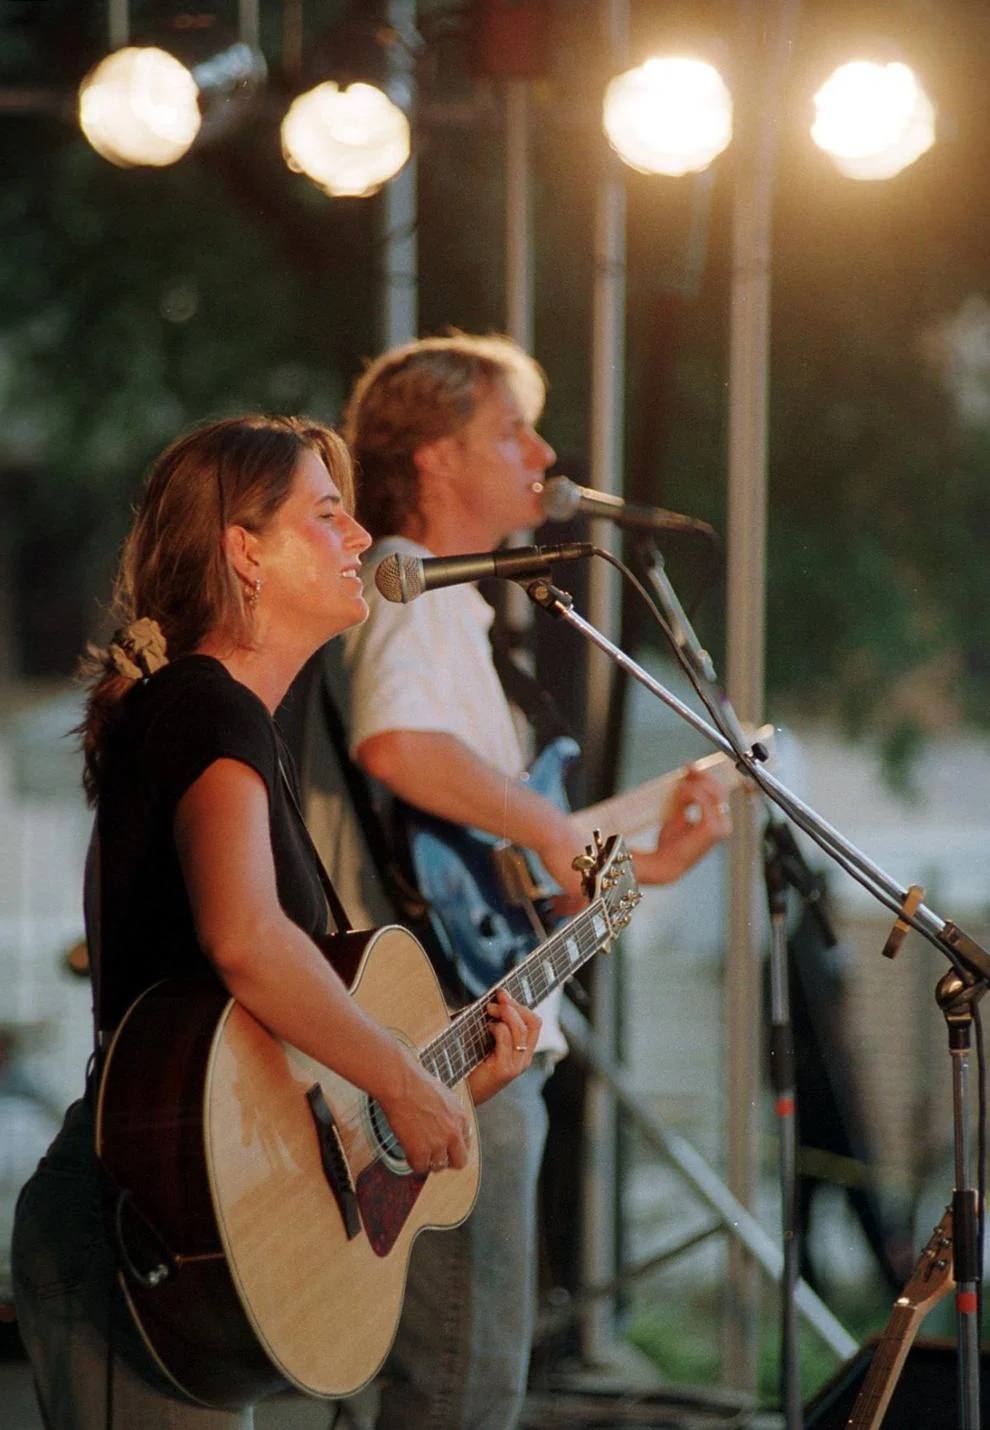 Jennifer Smith and her husband, Scott, members of the band Naked Blue, perform at Festival Park on Friday Cheers, 1999